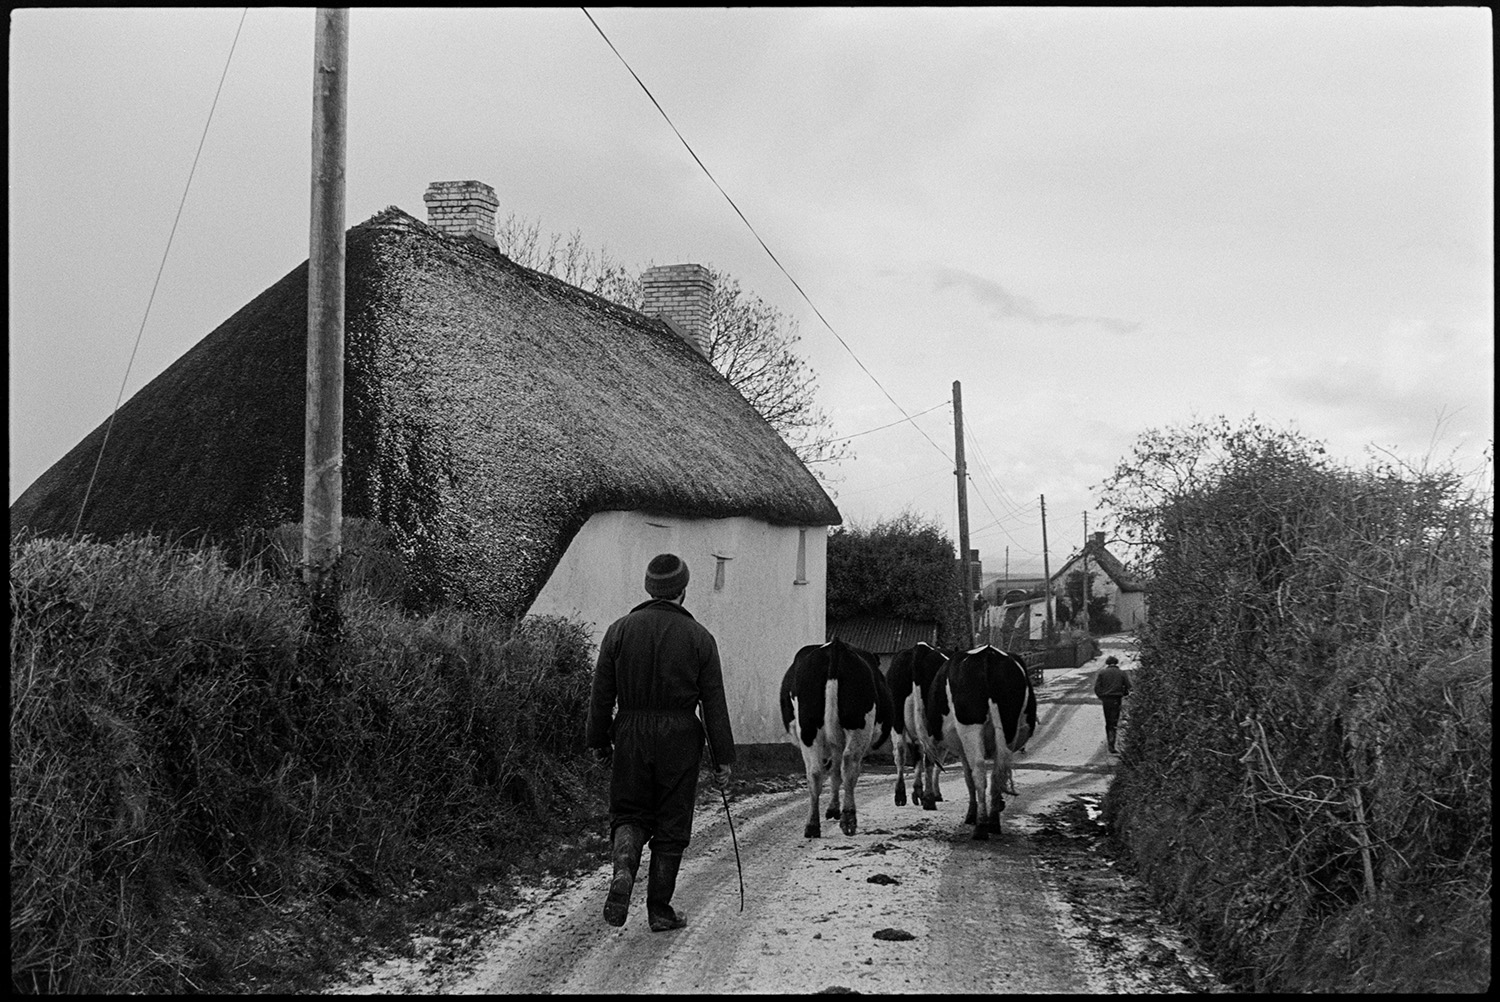 Milking herd of cows going through village. 
[Fred Folland herding three dairy cows along a road past a thatched cottage in Upcott, Dolton, to go to be milked. The road has a light dusting on snow and another person can be seen walking further along the road.]